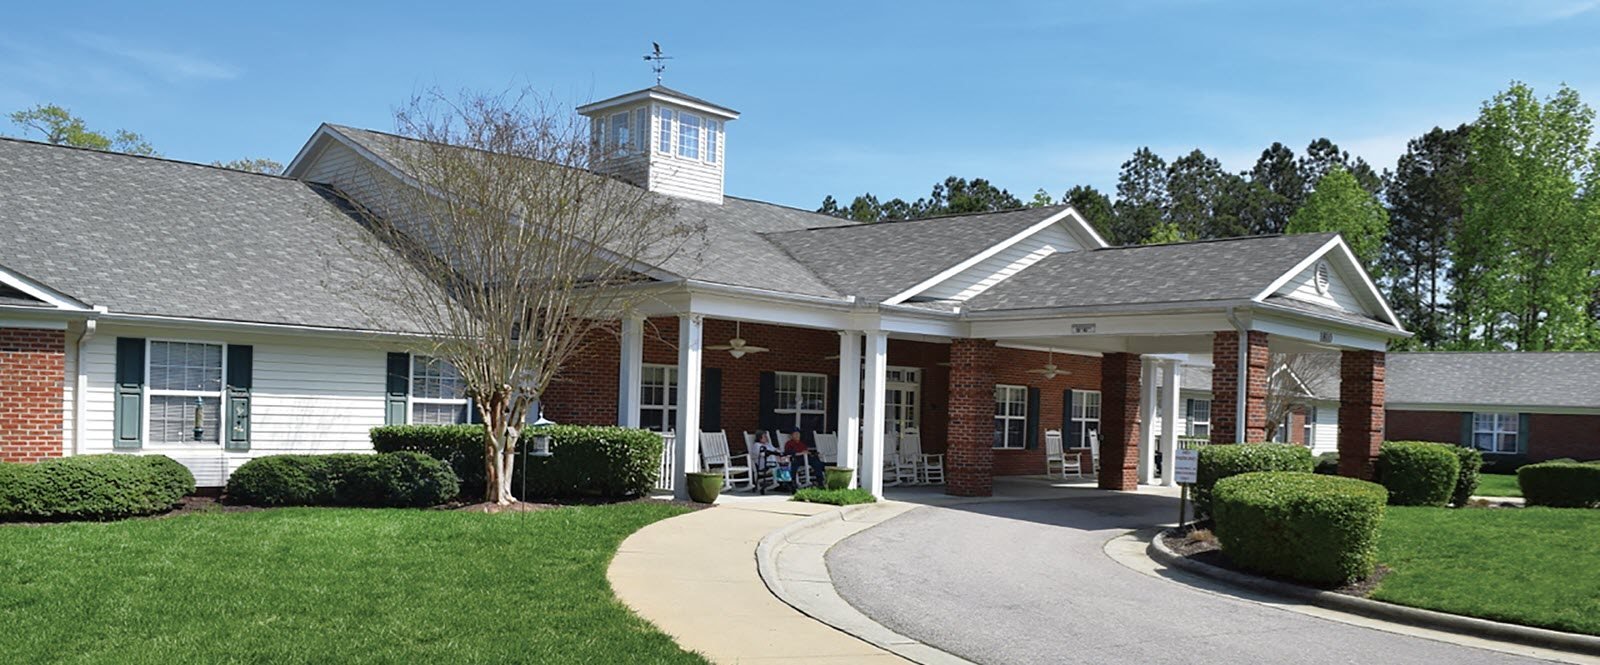 Assisted Care Facility Entrance at Spring Arbor of Apex in Apex, NC